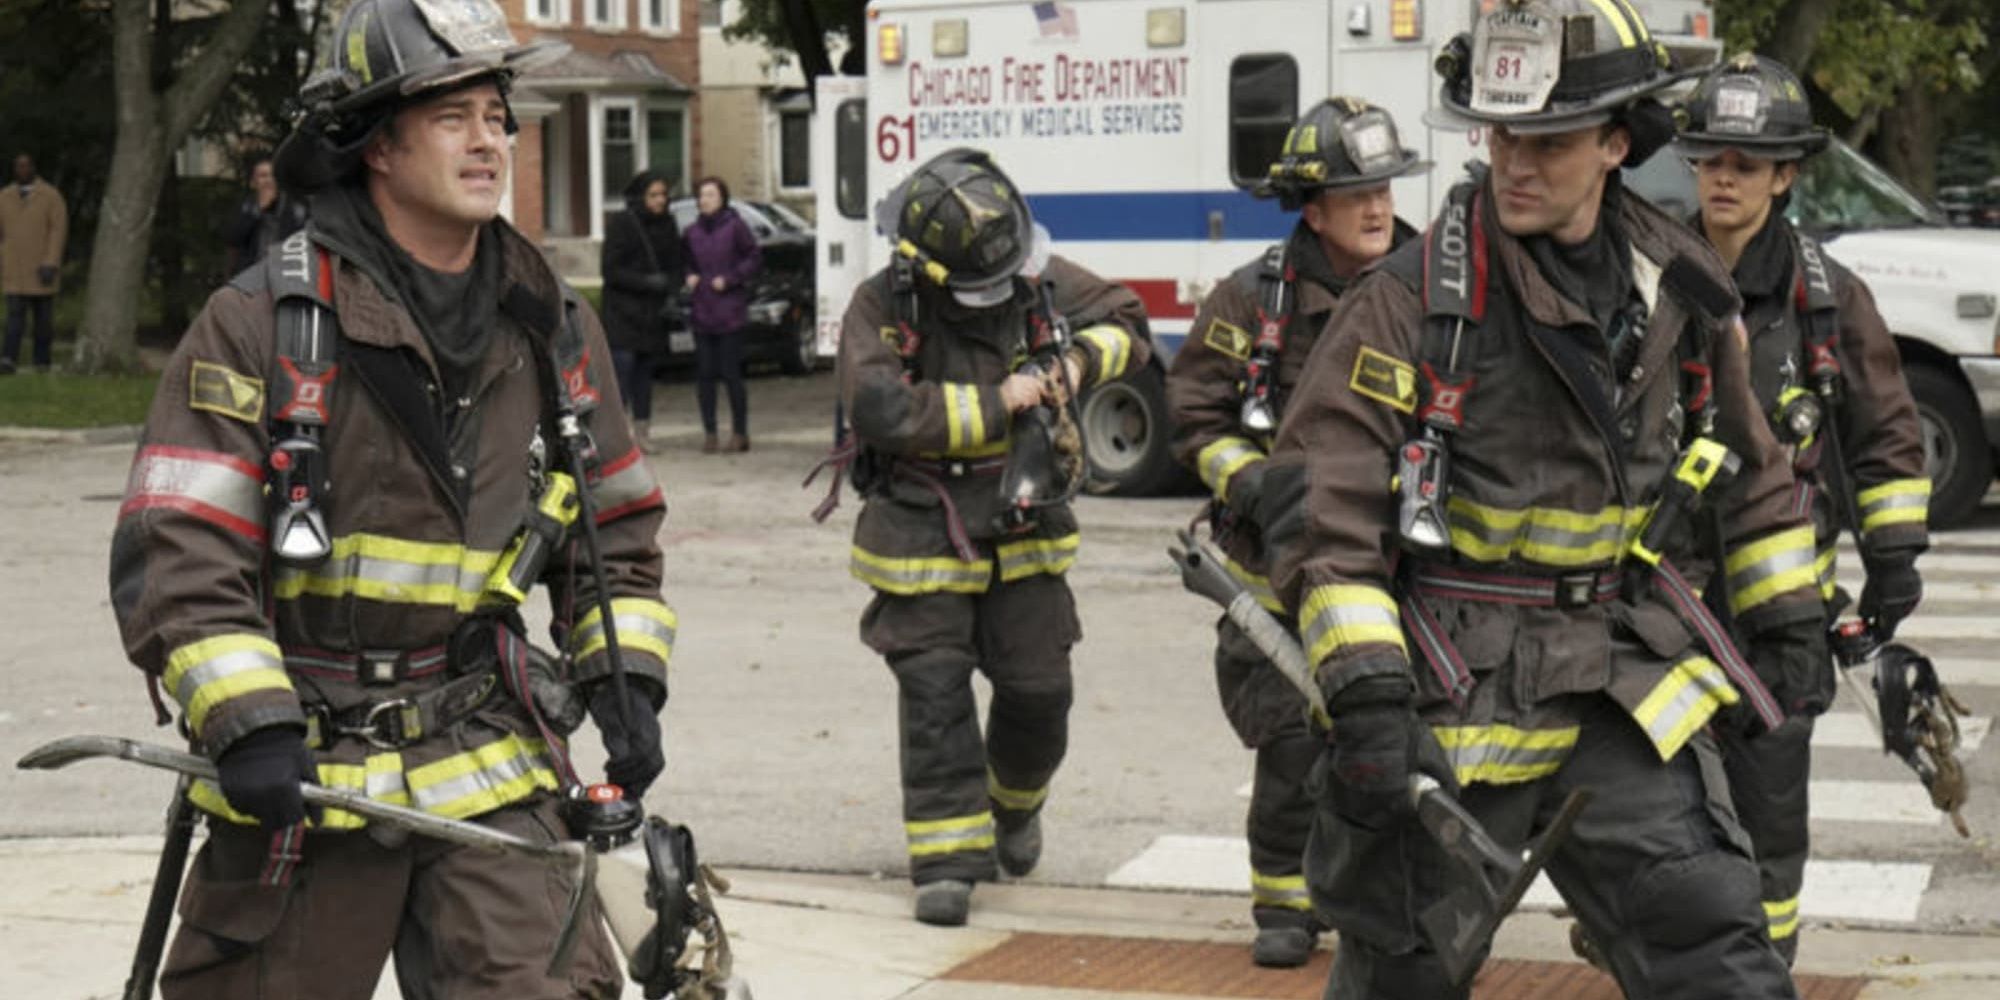 casey, severide, mouch and kidd walking in their uniforms in chicago fire